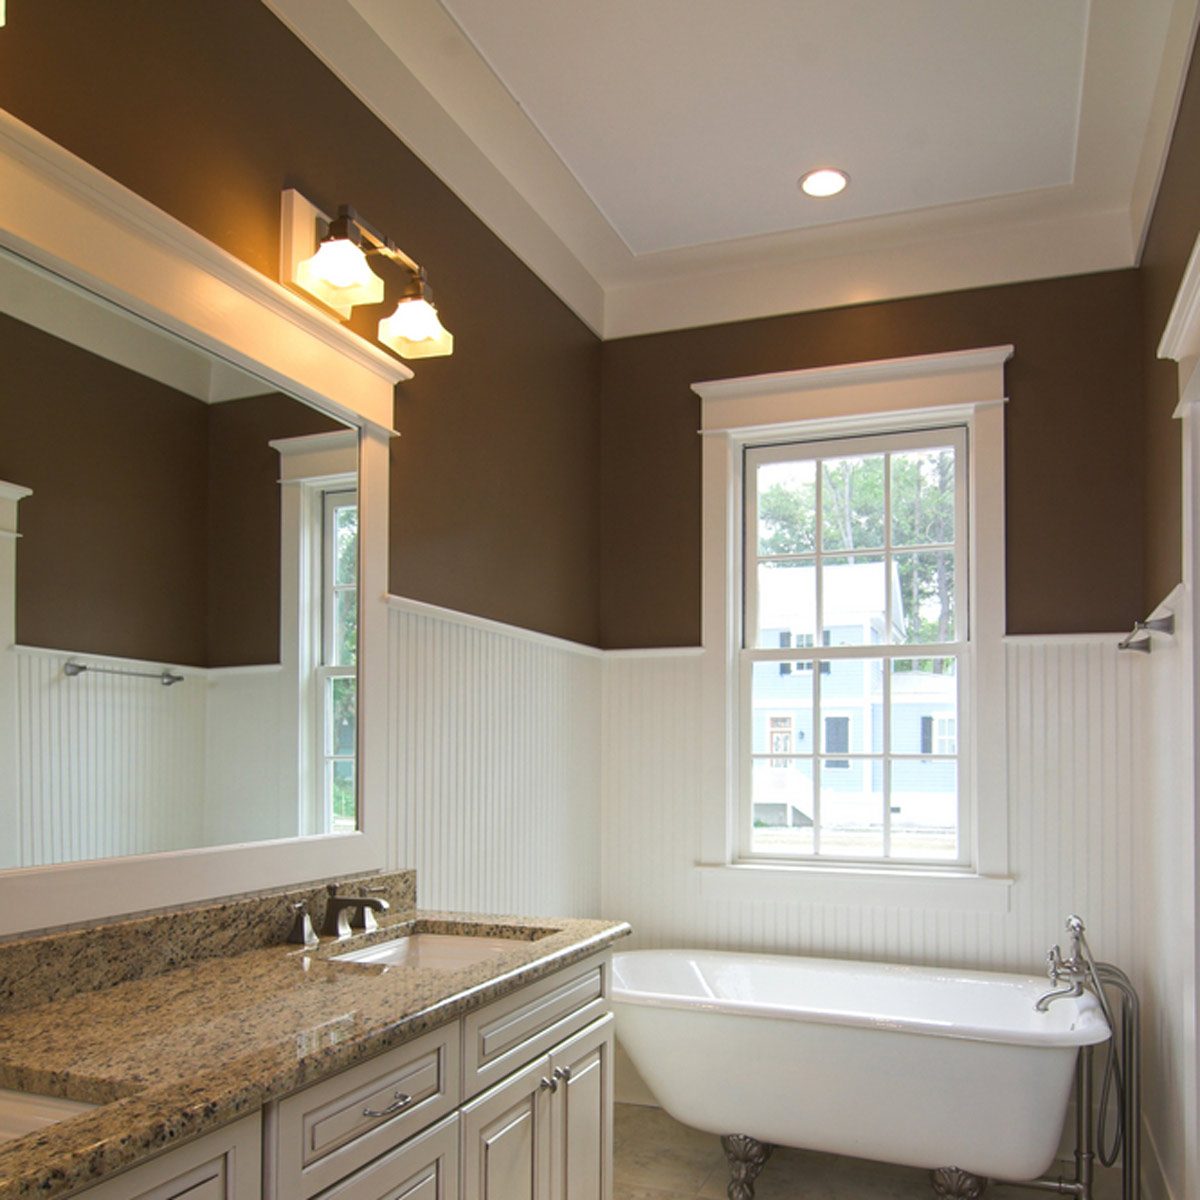 How to Make a Small Bathroom Look Bigger The Family Handyman